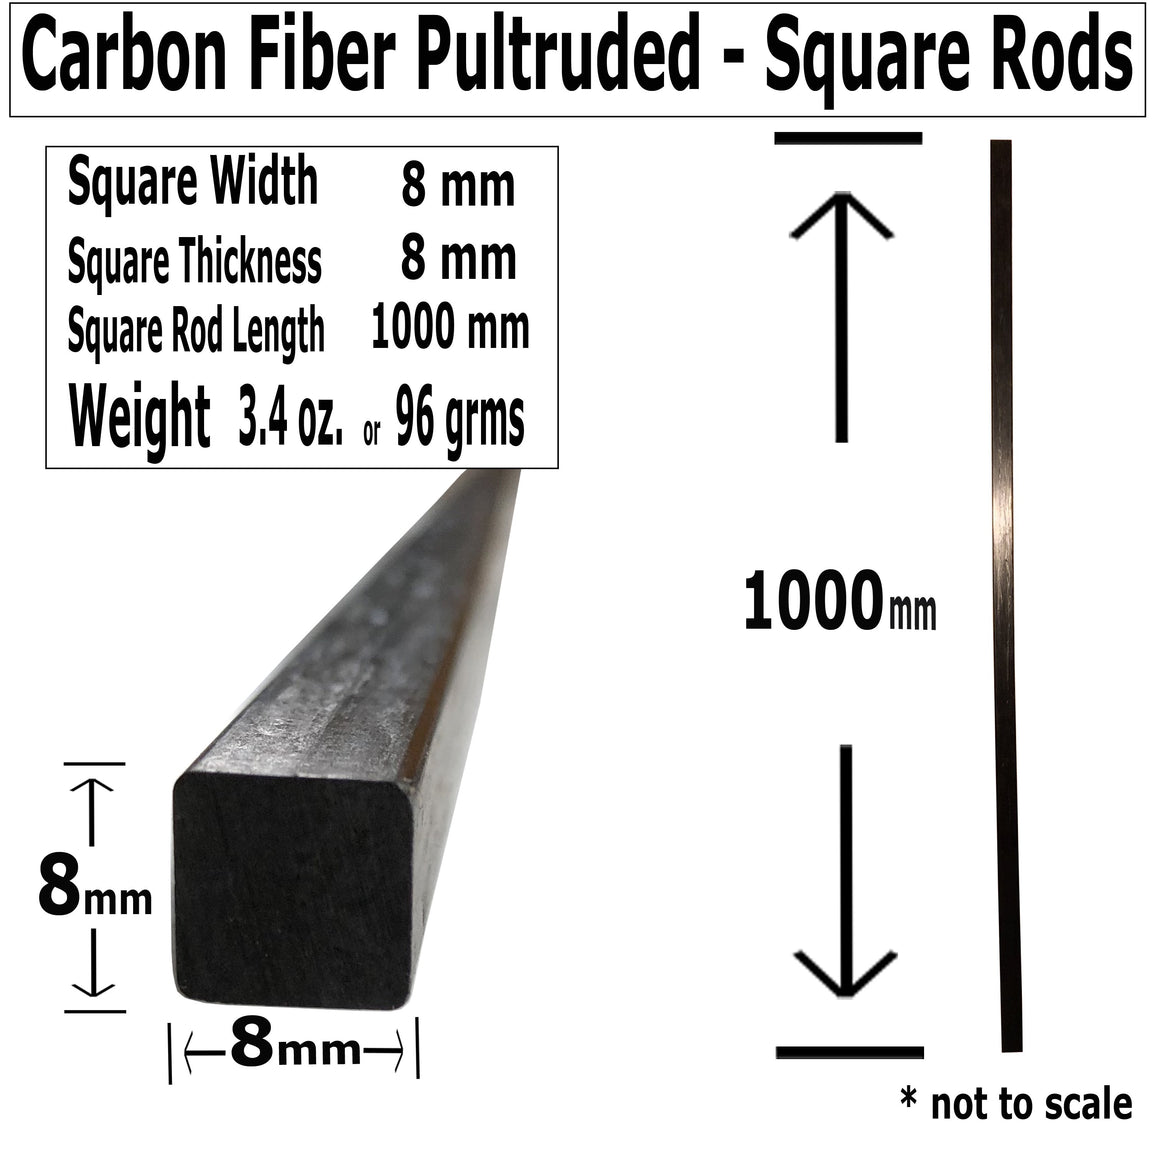 (4) 8mm X 1000mm - PULTRUDED-Square Carbon Fiber Rod. 100% Pultruded high Strength Carbon Fiber. Used for Drones, Radio Controlled Vehicles. Projects requiring high Strength to Weight Components.